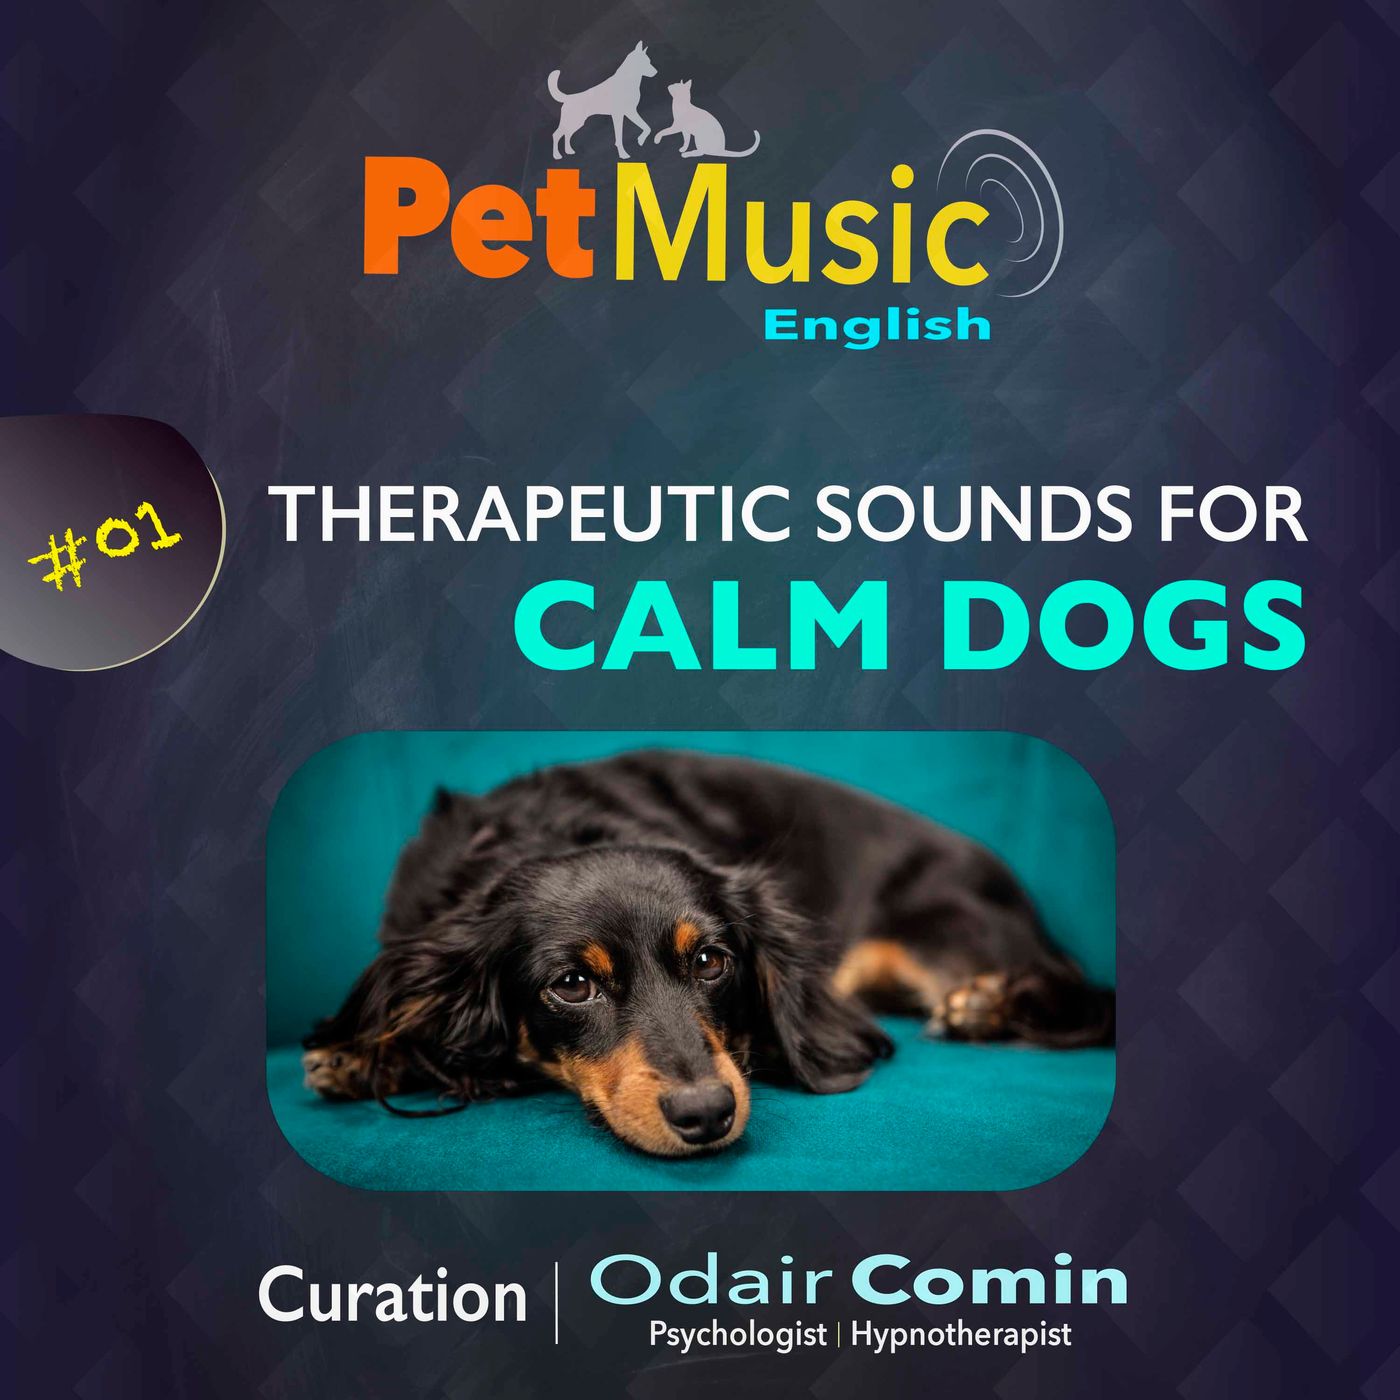 #01 Therapeutic Sounds for Calm Dogs | PetMusic